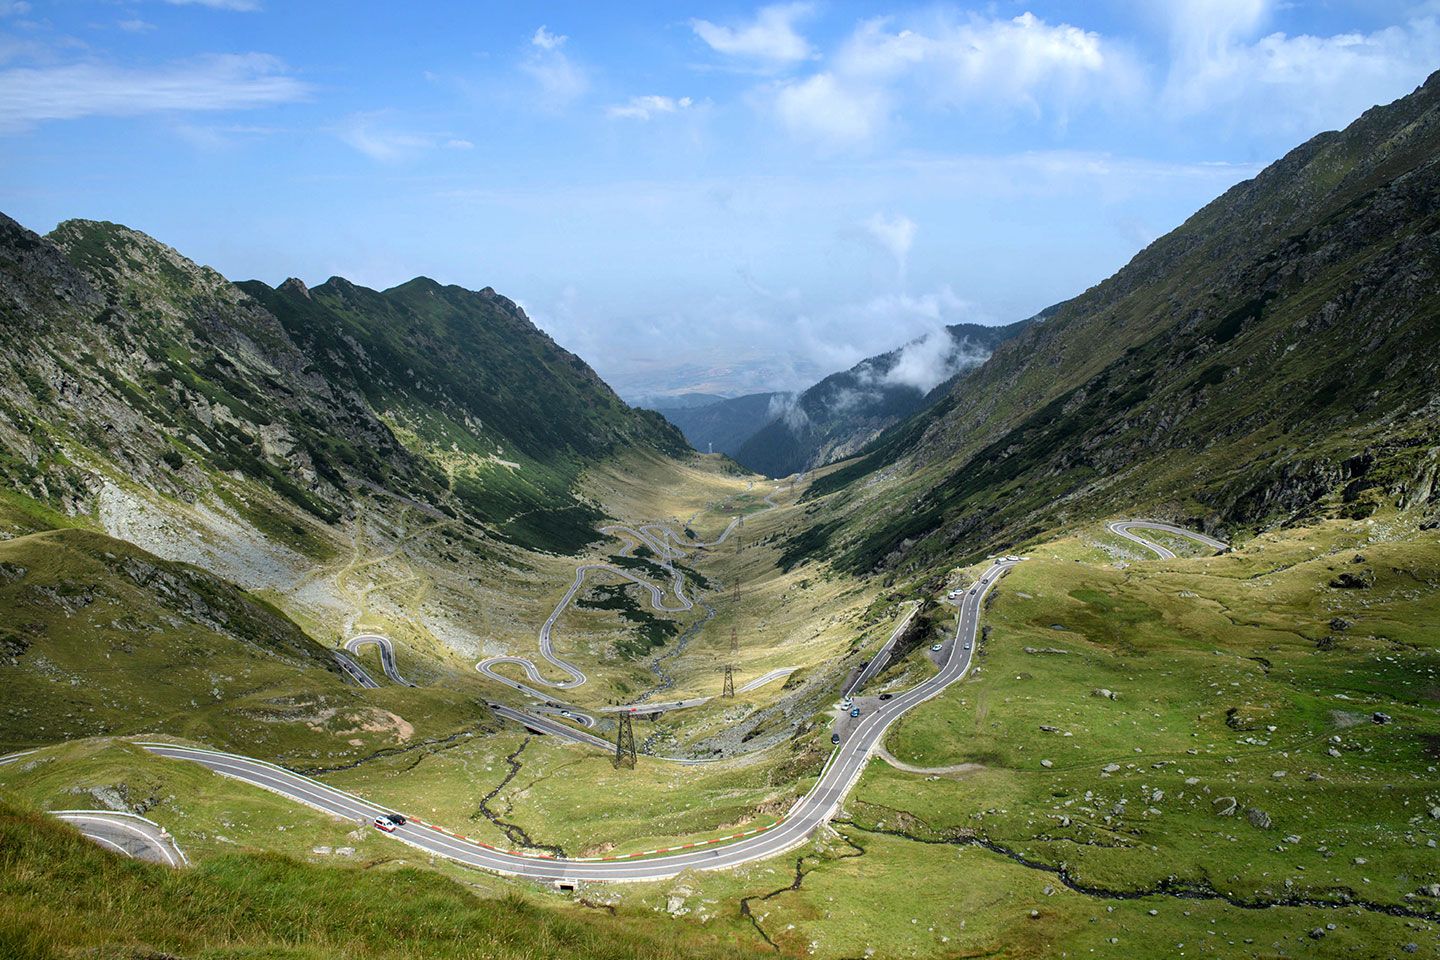 View from the top of the Transfagarasan